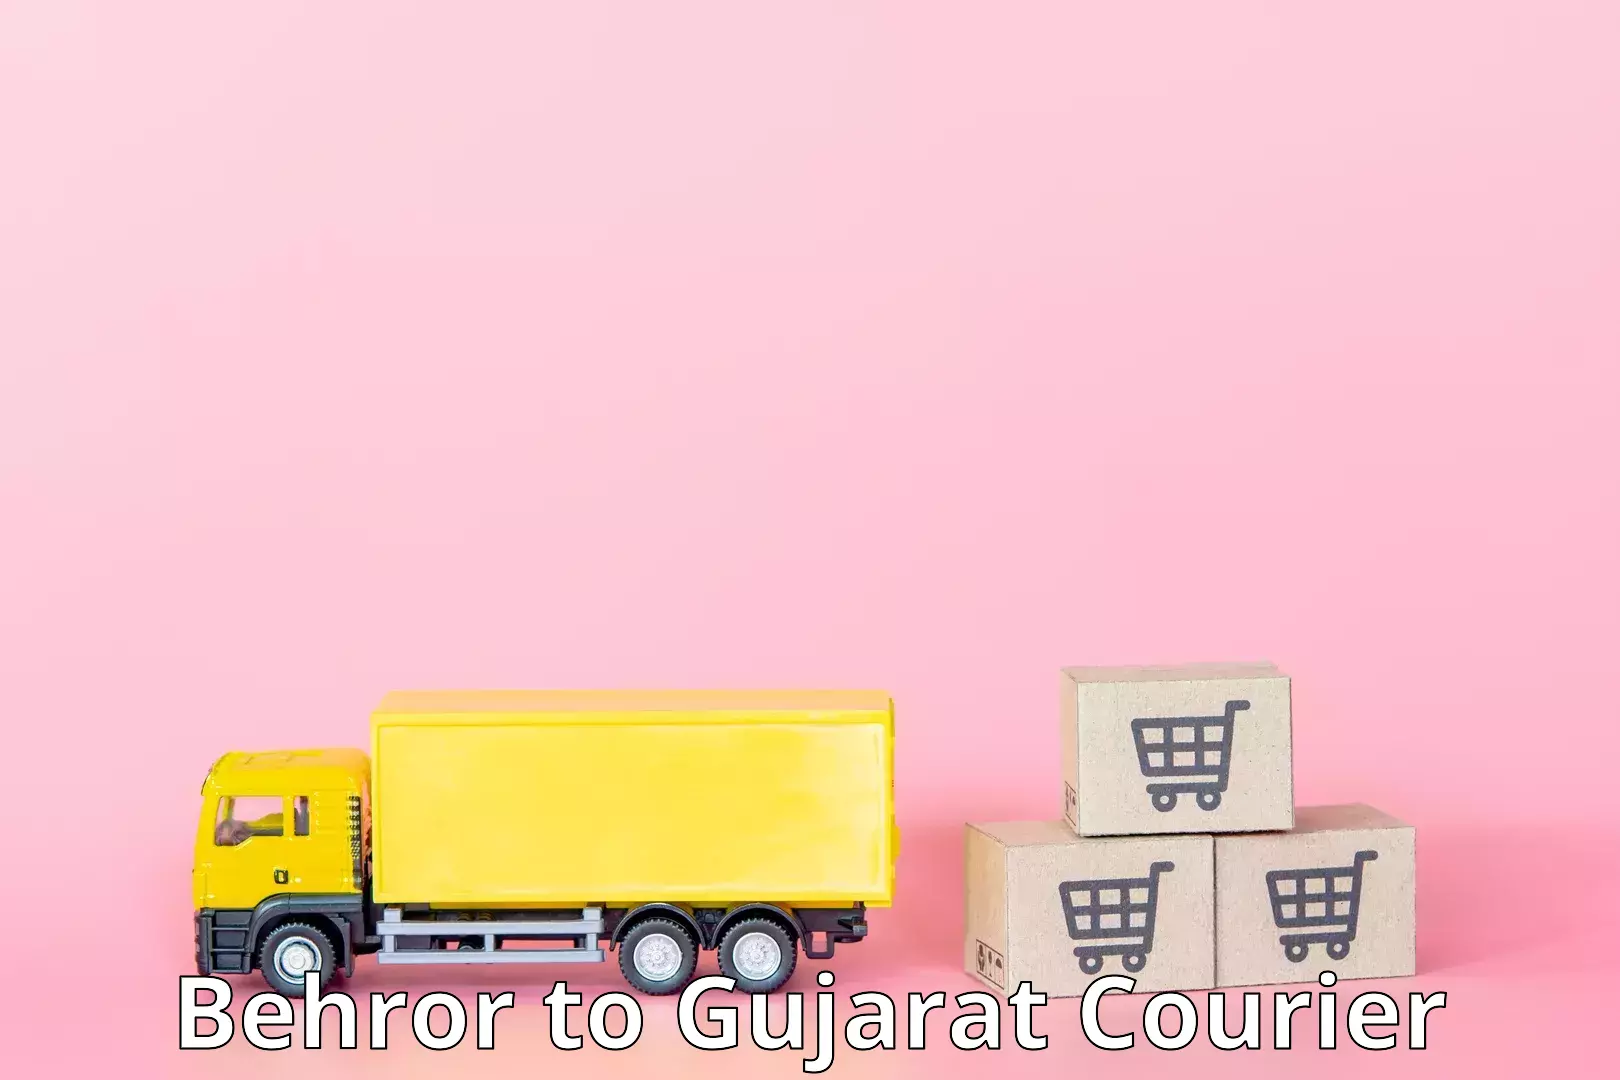 Multi-national courier services Behror to Kandla Port